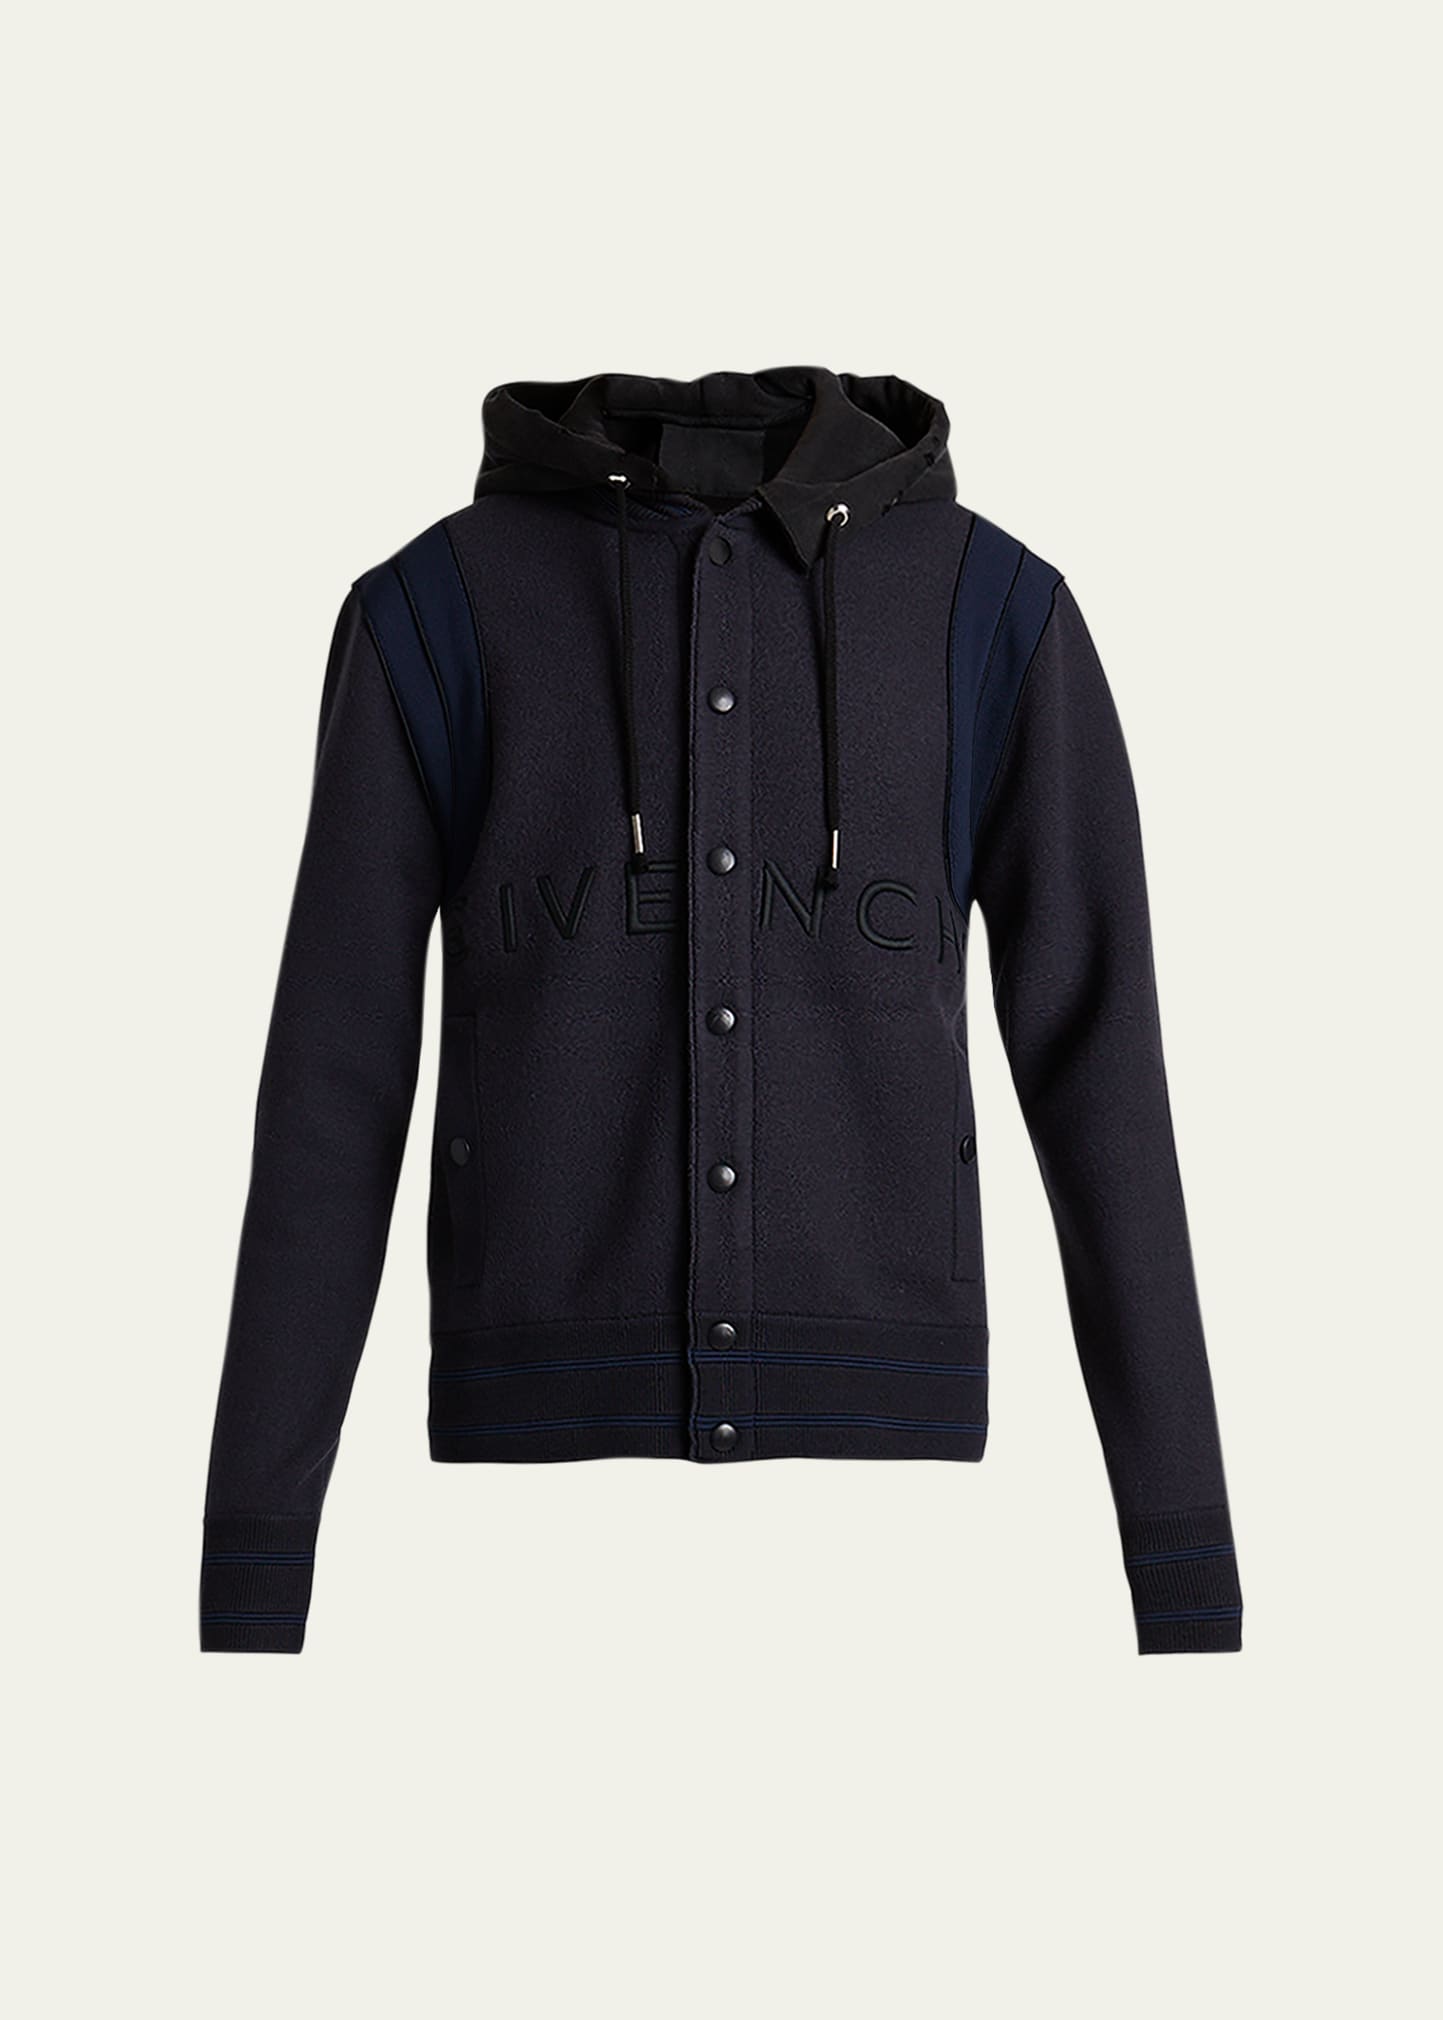 Givenchy Men's Hooded Embroidered Varsity Jacket In Black